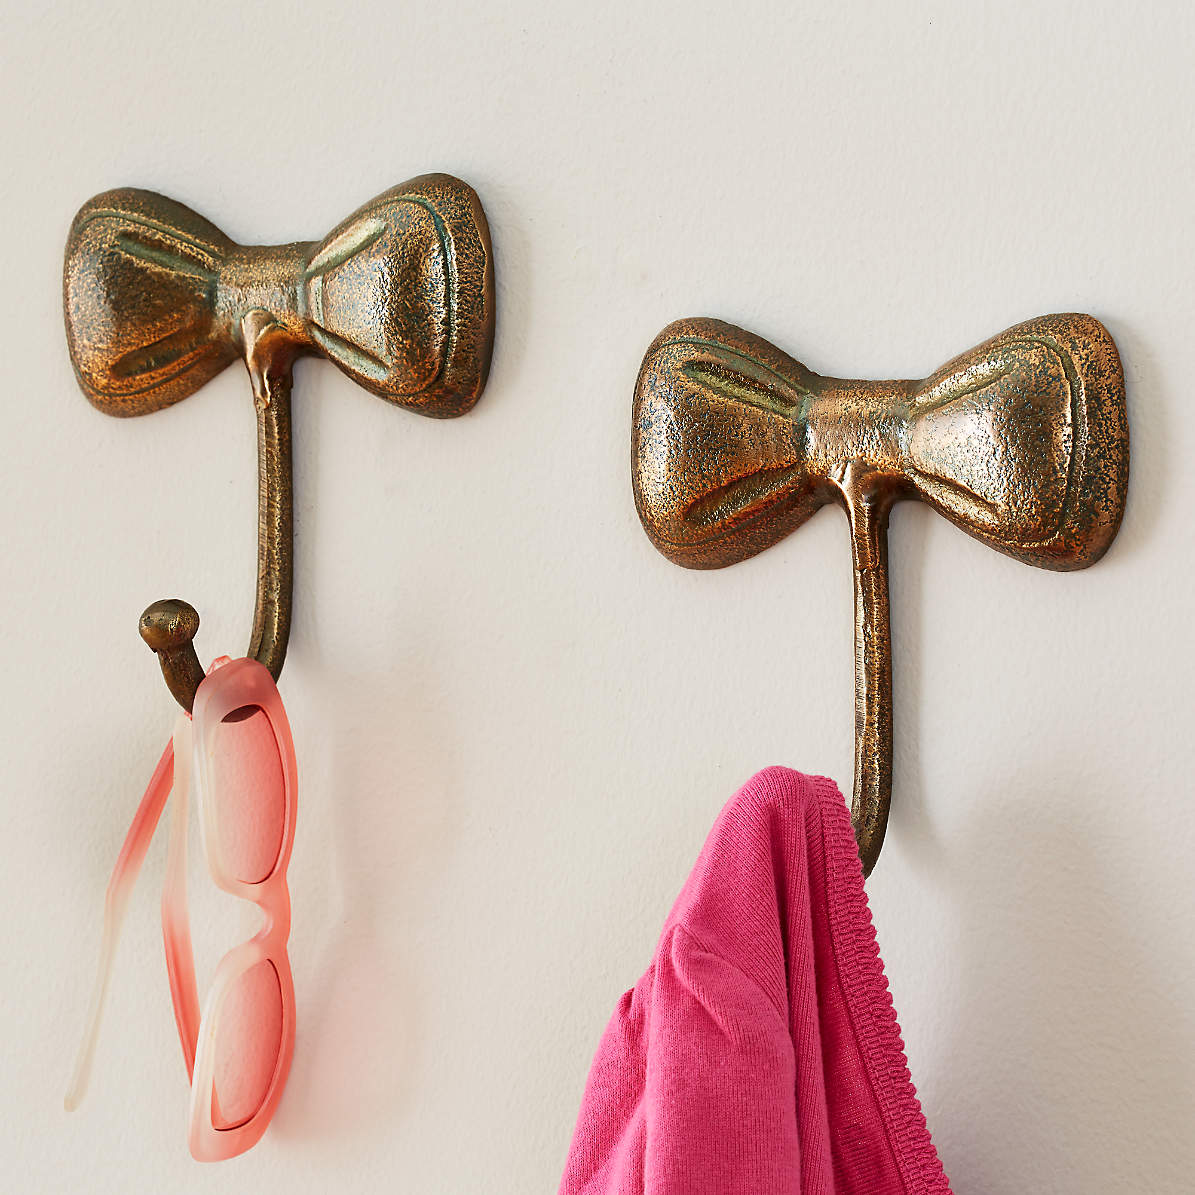 Shopping for Wall Hooks - The New York Times